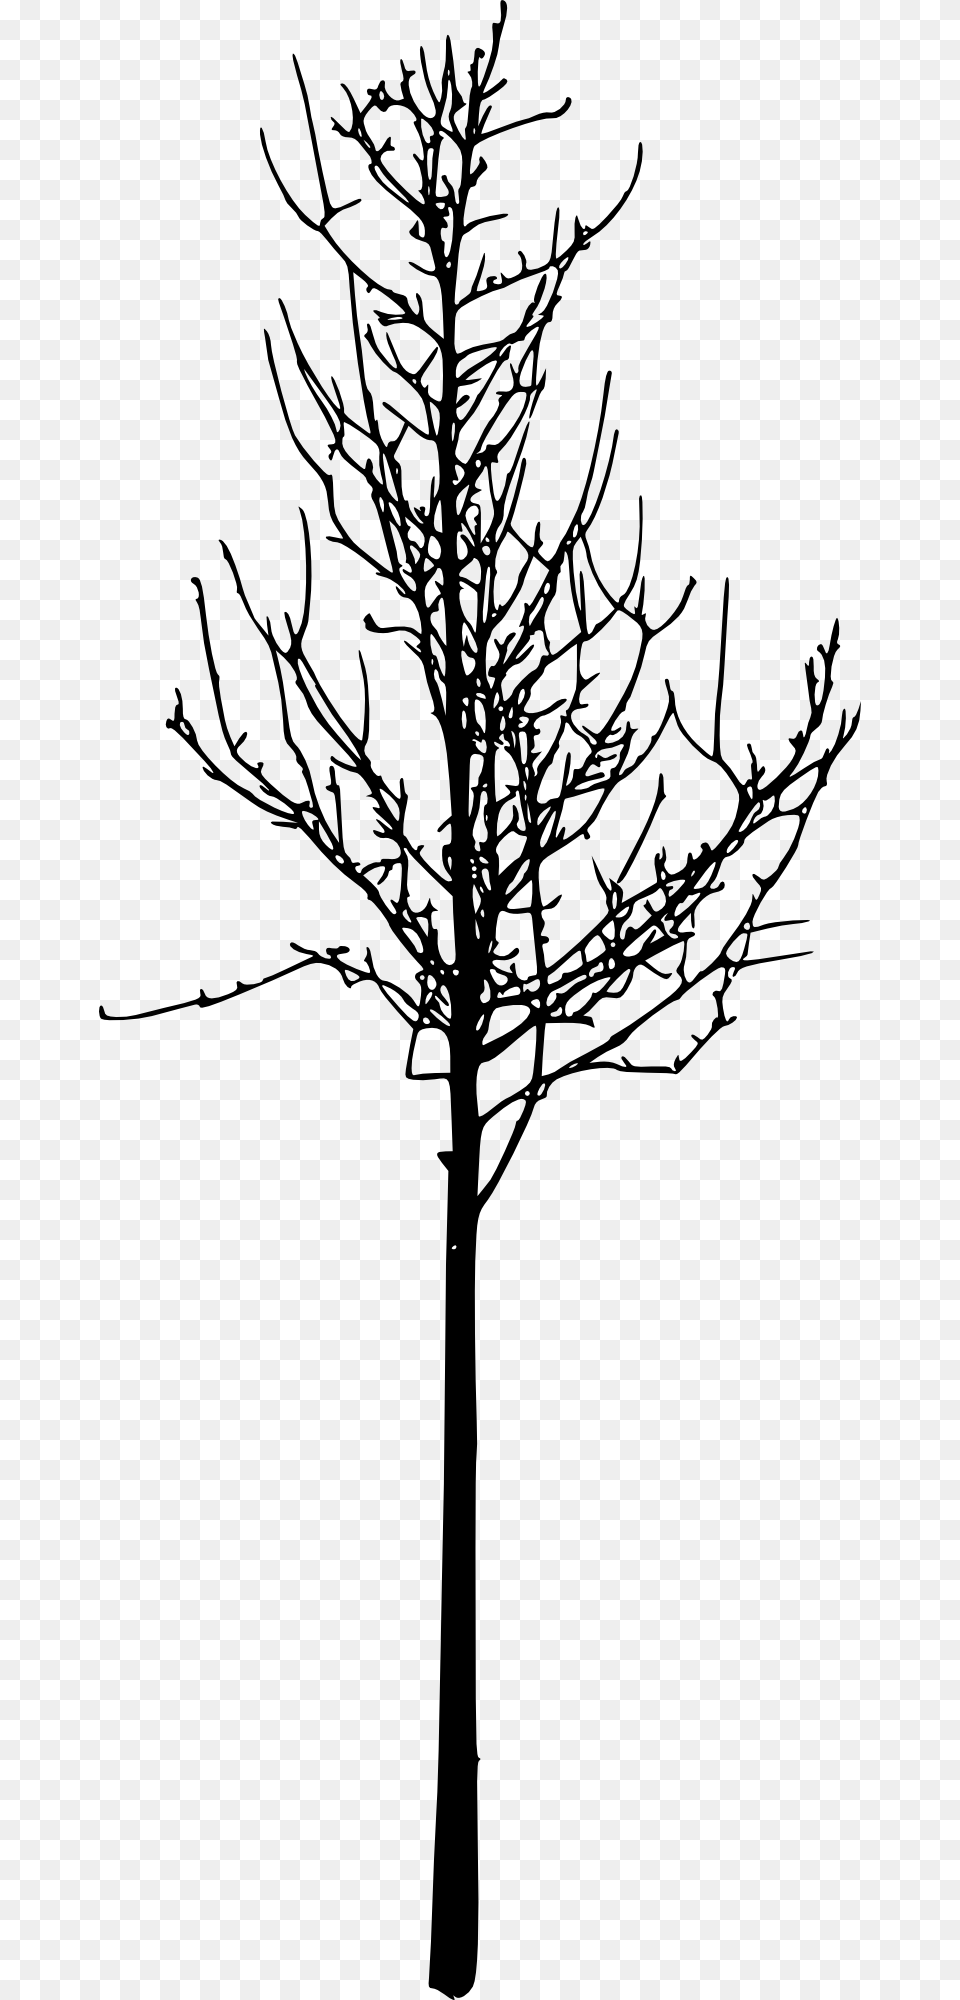 Simple Bare Tree Silhouettes Portable Network Graphics, Plant, Silhouette, Tree Trunk, Art Png Image